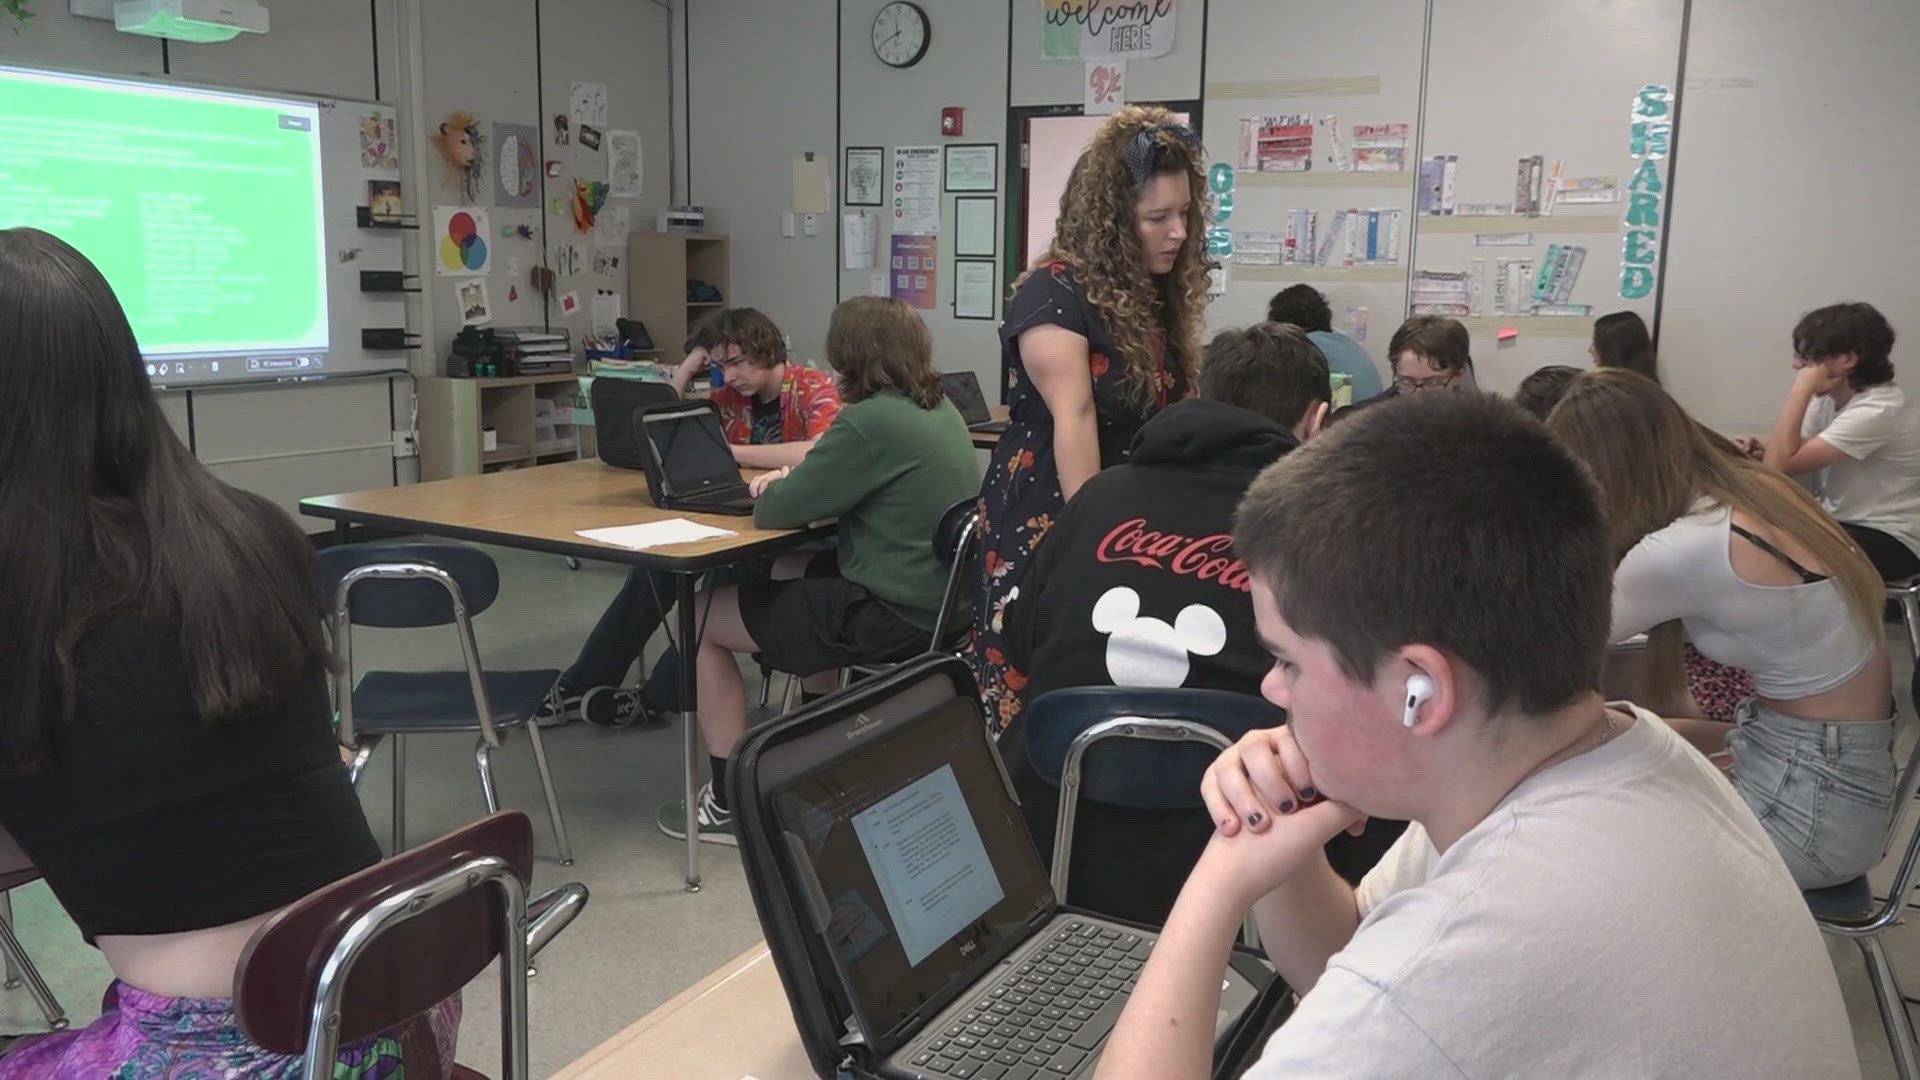 The Maine Department of Education says that 27 percent of all Maine public school students were chronically absent last year. Bangor schools are trying to fix that.